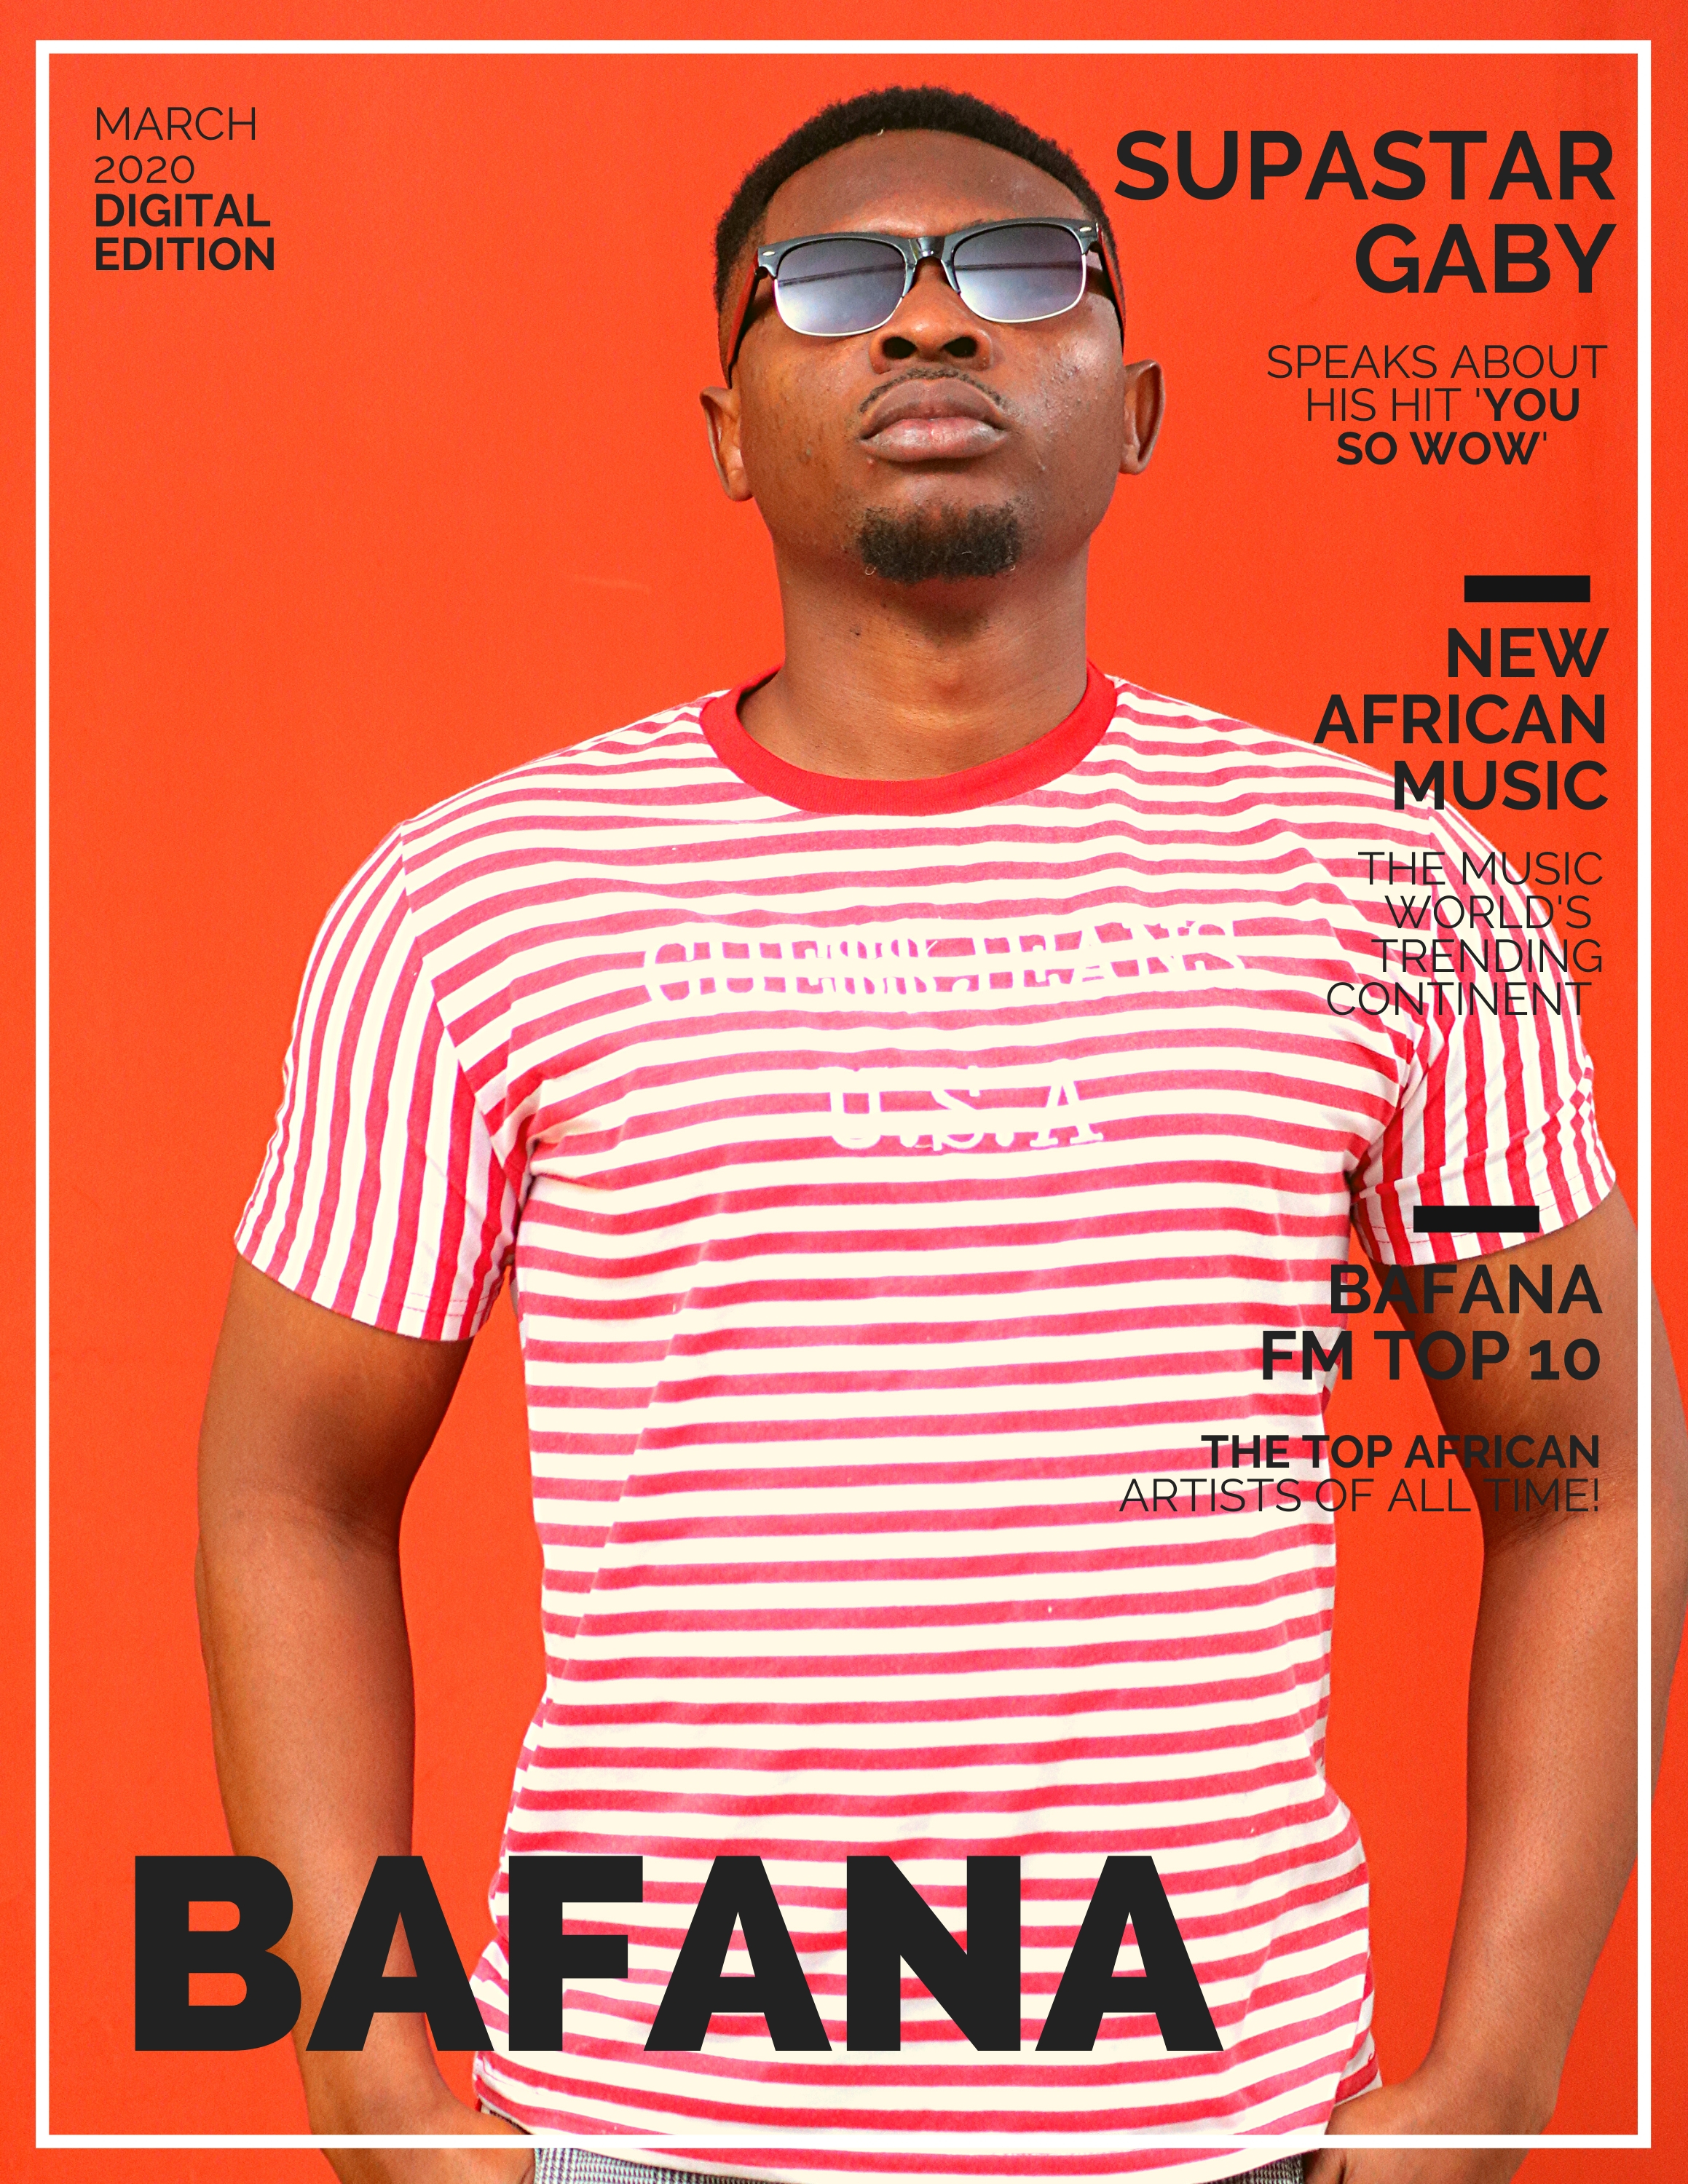 ‘Supastar Gaby’ graces the Cover of the brand new ‘Bafana’ Magazine with style as he celebrates his global single ‘You So Wow’